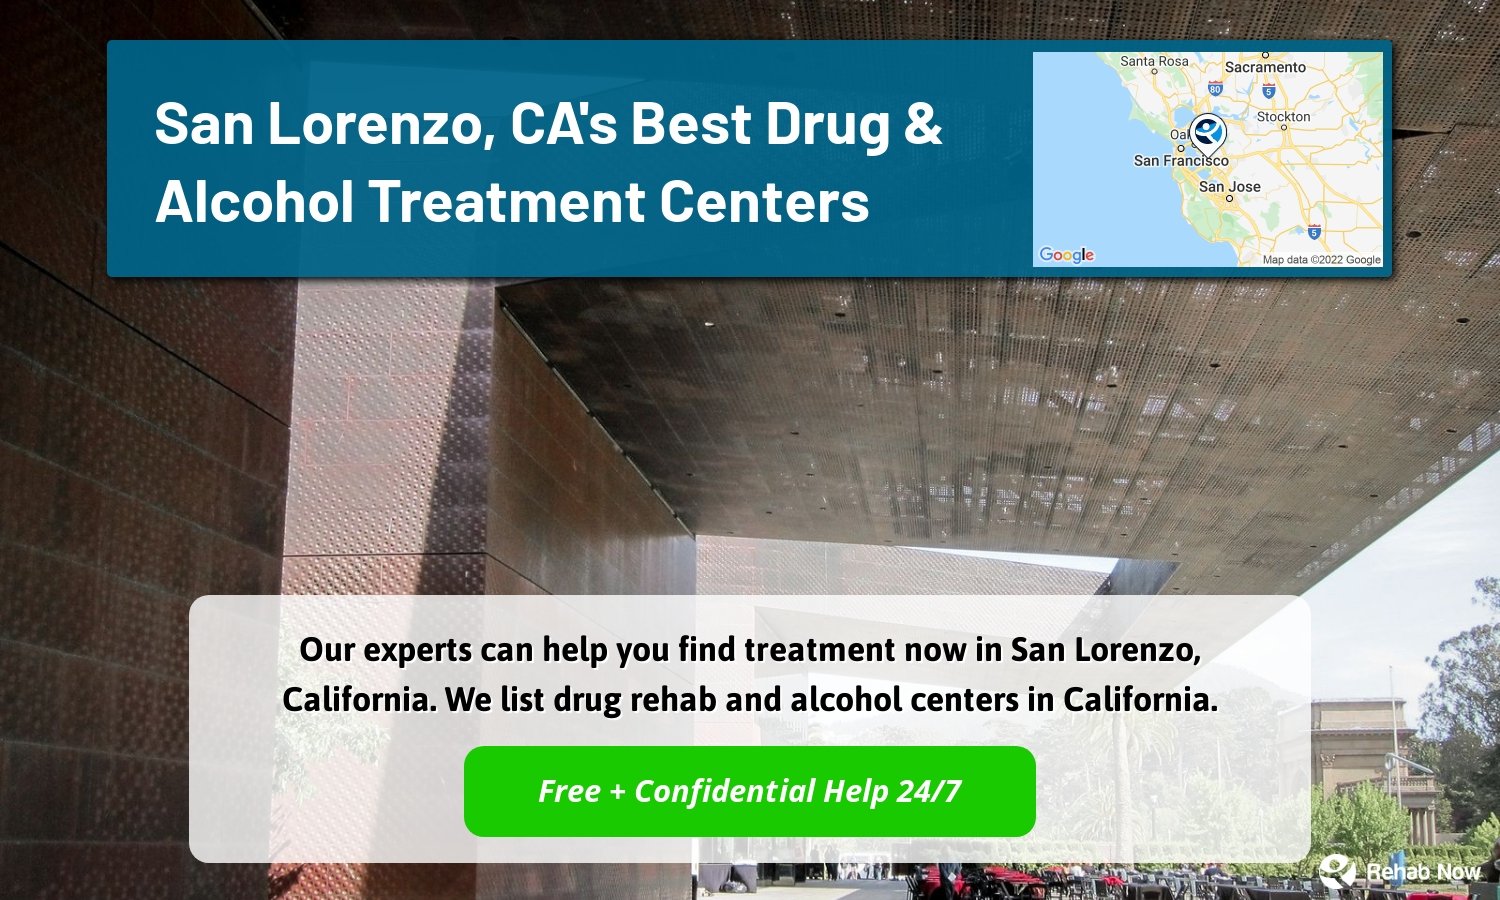 Our experts can help you find treatment now in San Lorenzo, California. We list drug rehab and alcohol centers in California.